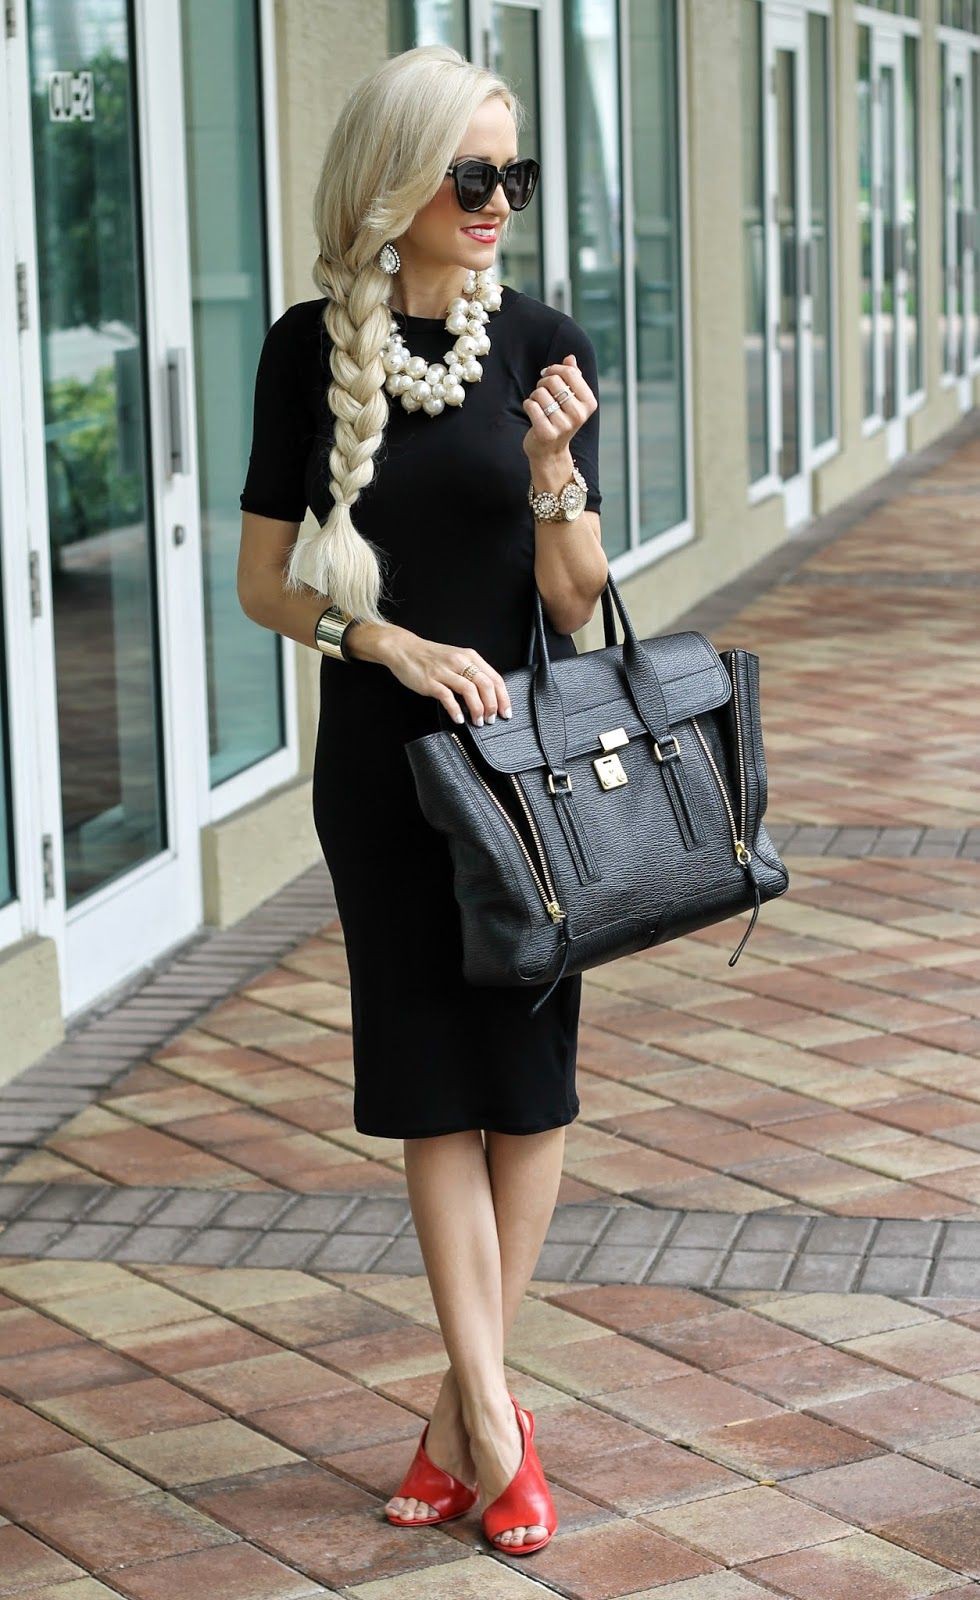 What Shoes To Wear With A Black Dress, Little black dress: Black Dress Outfits,  black dress  